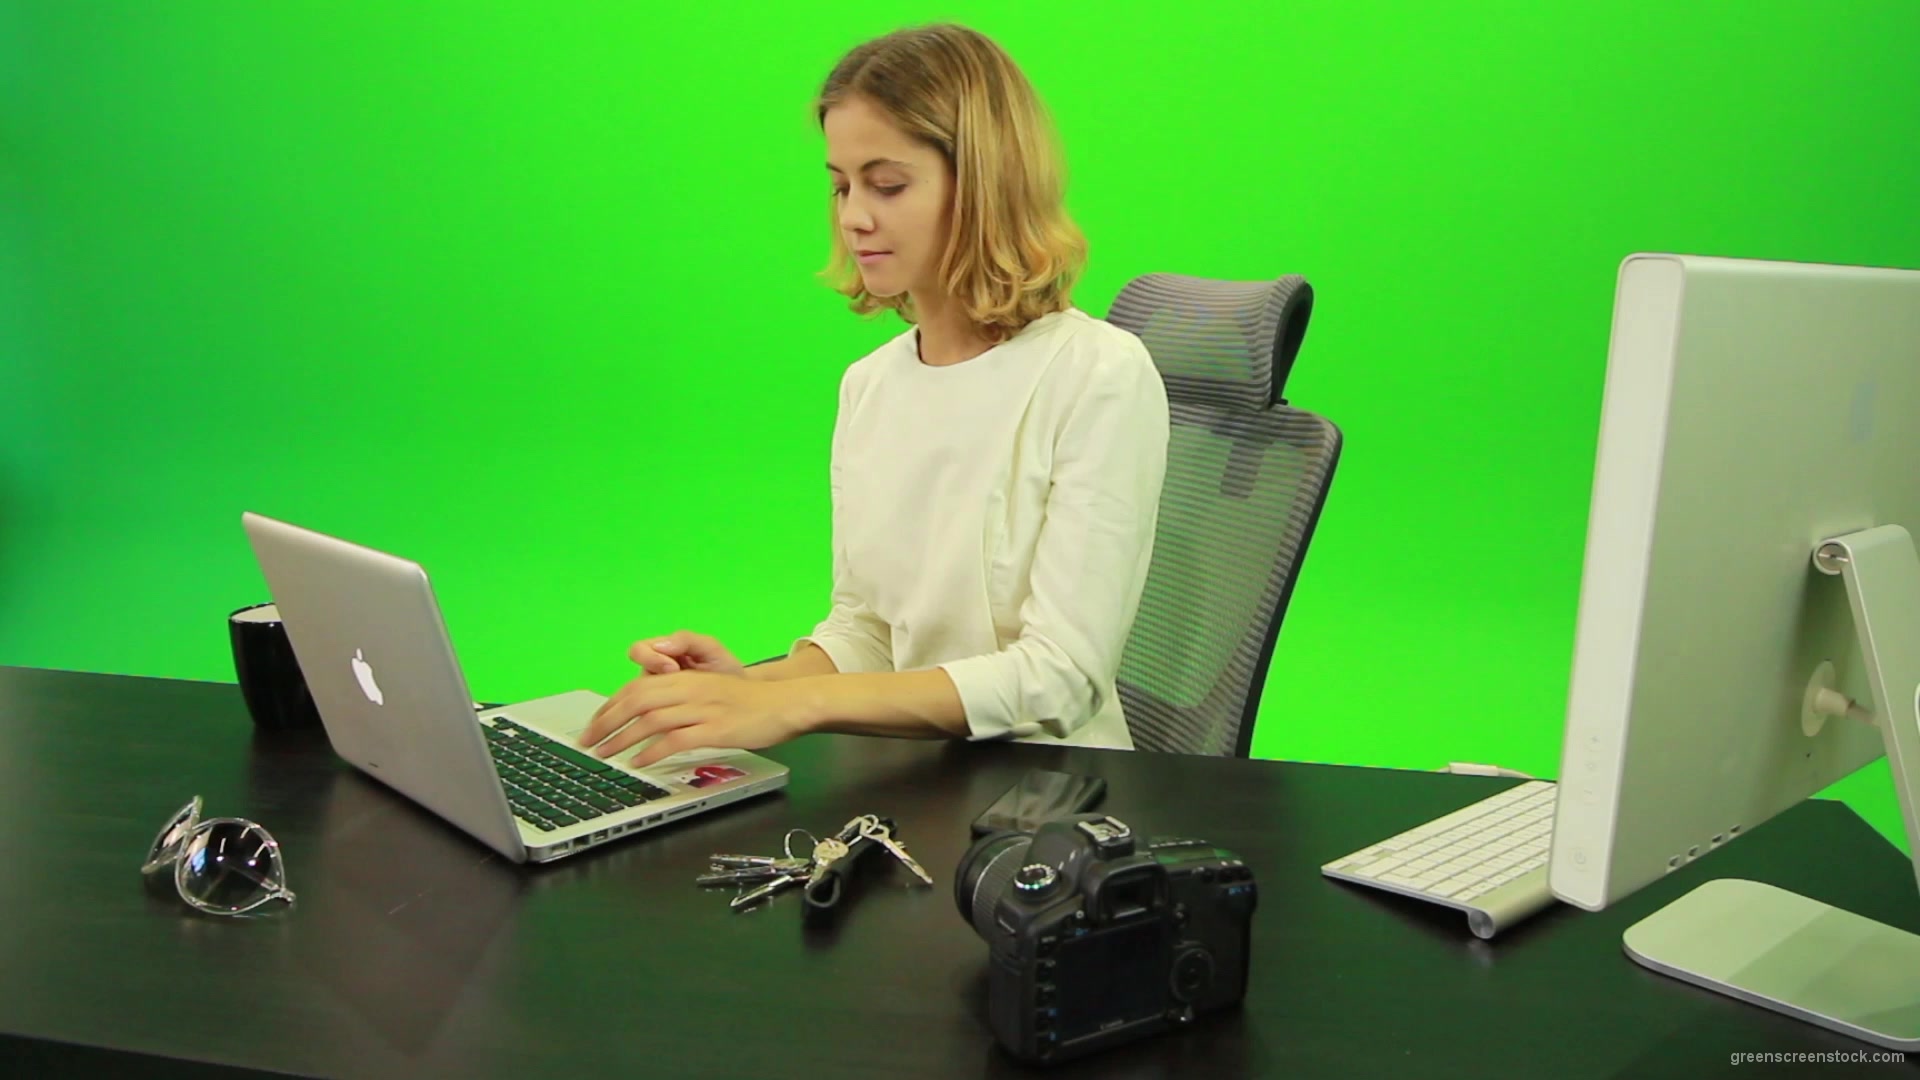 Business-Woman-Relaxing-and-Drinking-Coffee-after-Hard-Work-Green-Screen-Footage_001 Green Screen Stock